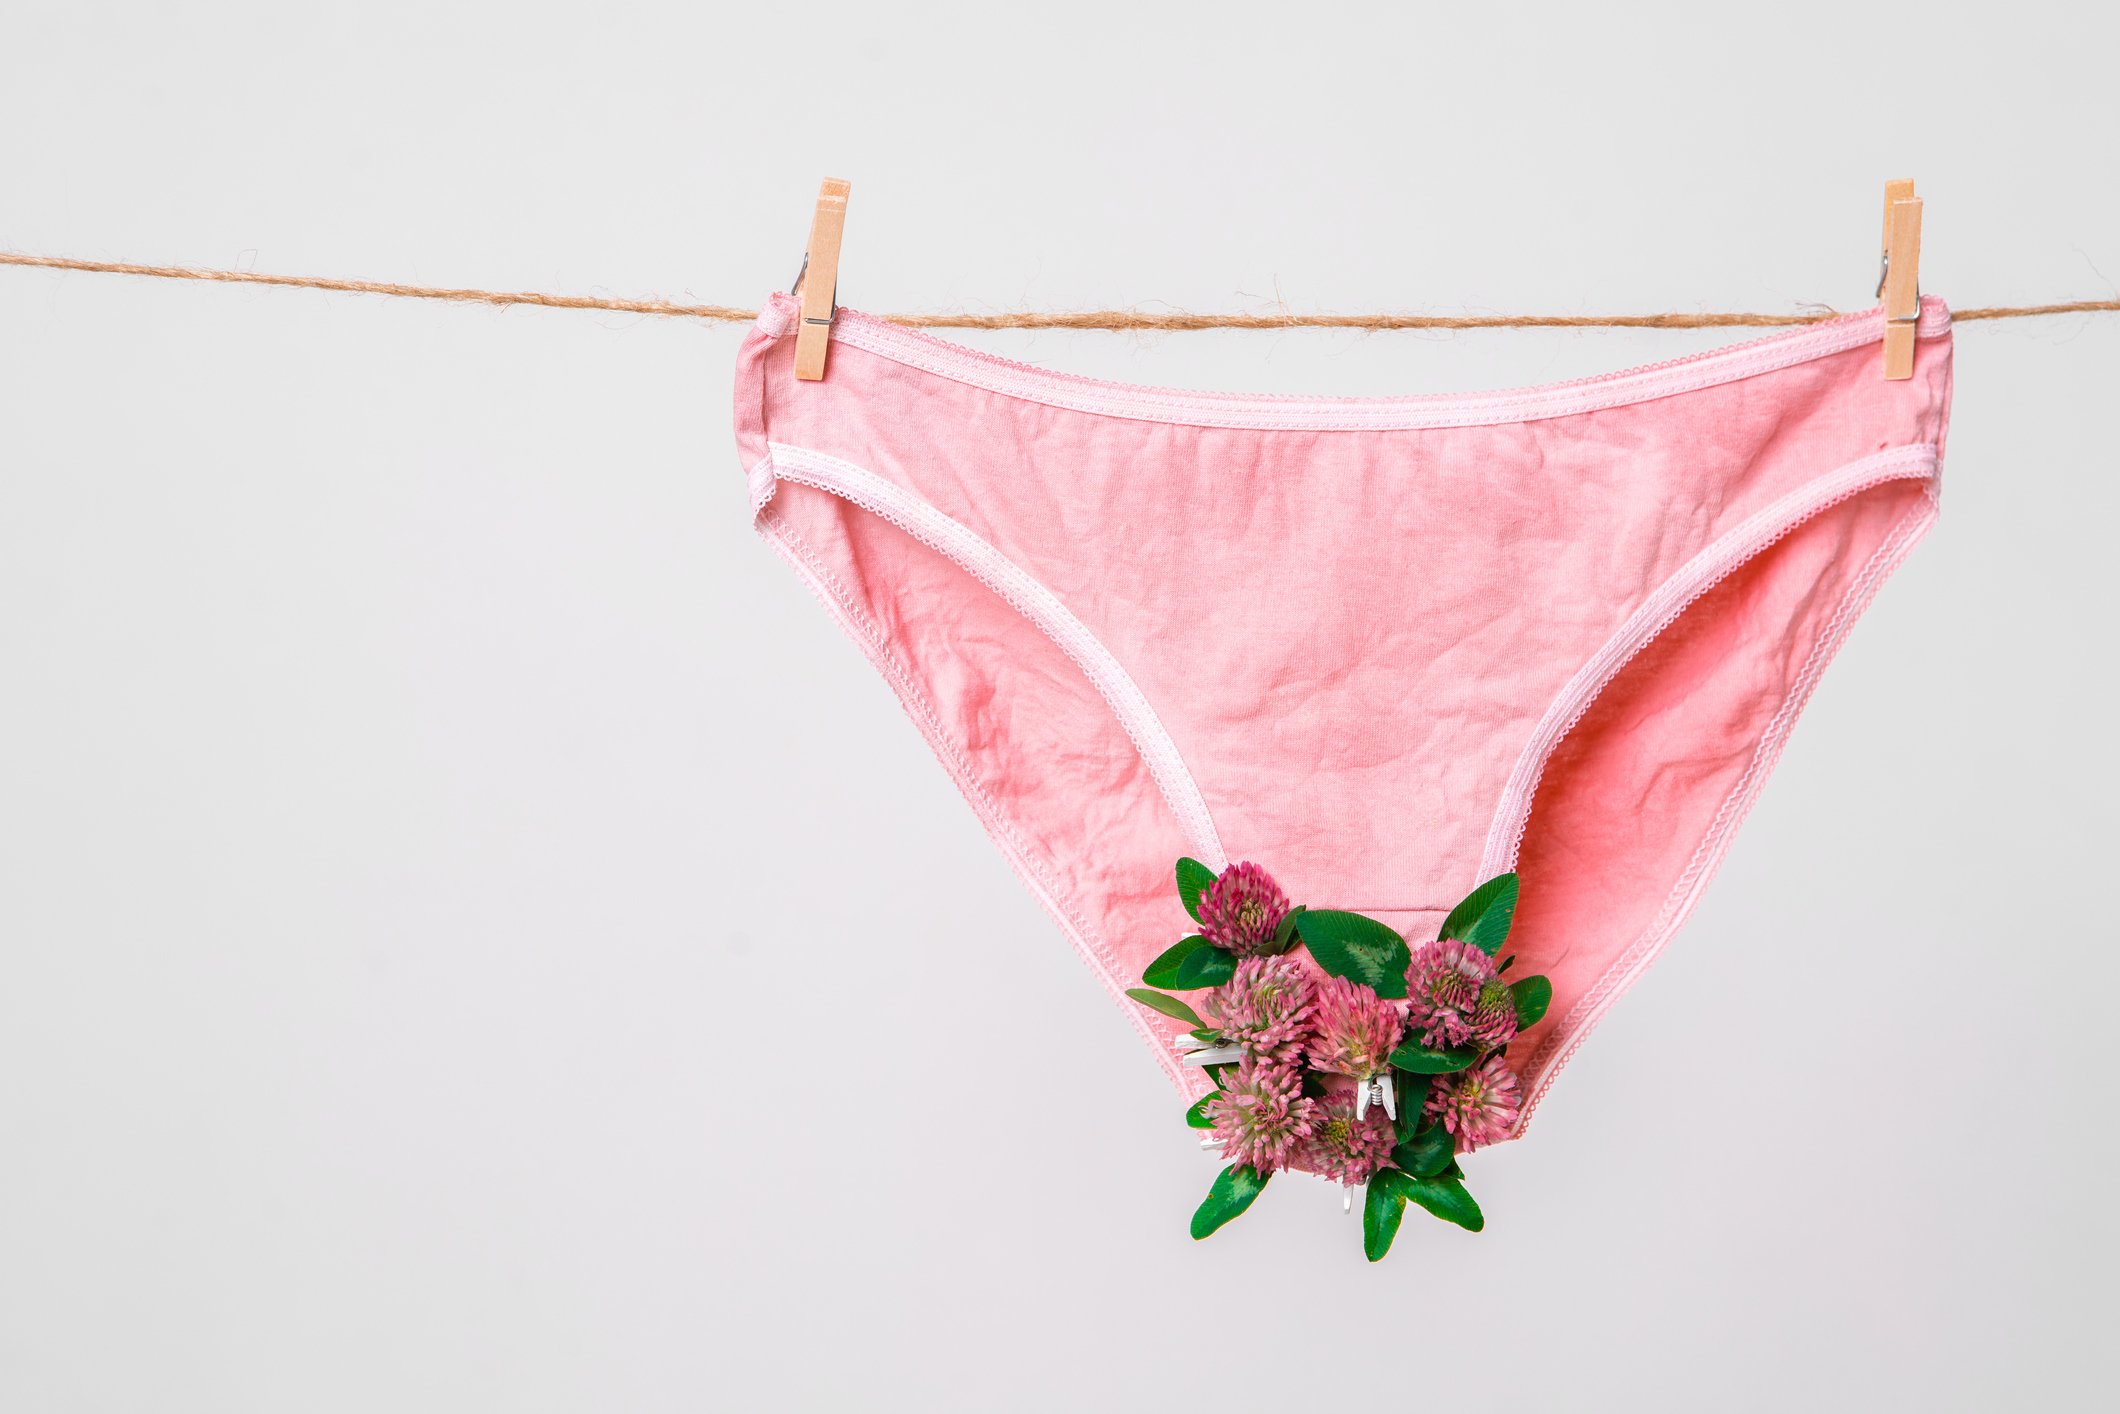 a pair of pink underwear with flowers attached to the crotch strung on a clothes line